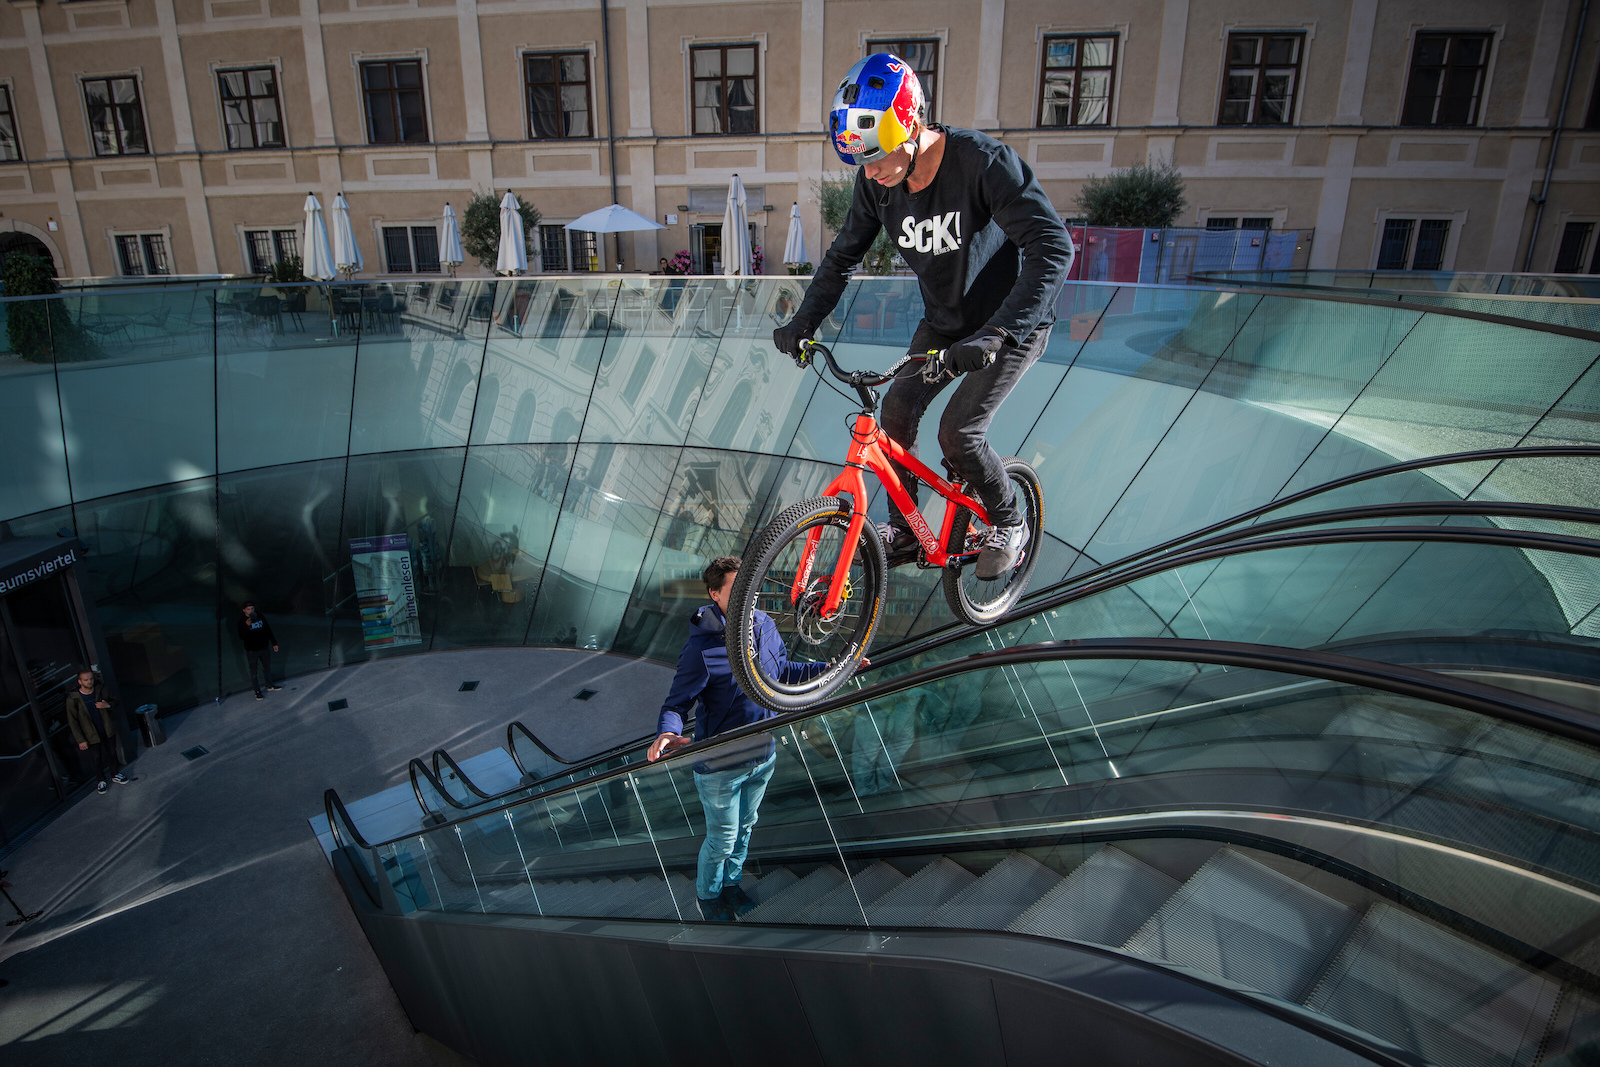 Fabio Wibmer performs during the Shoot of Wibmers Law in Graz, Austria on September 28, 2018 // Philip Platzer/Red Bull Content Pool // AP-21KD4A8HD1W11 // Usage for editorial use only //